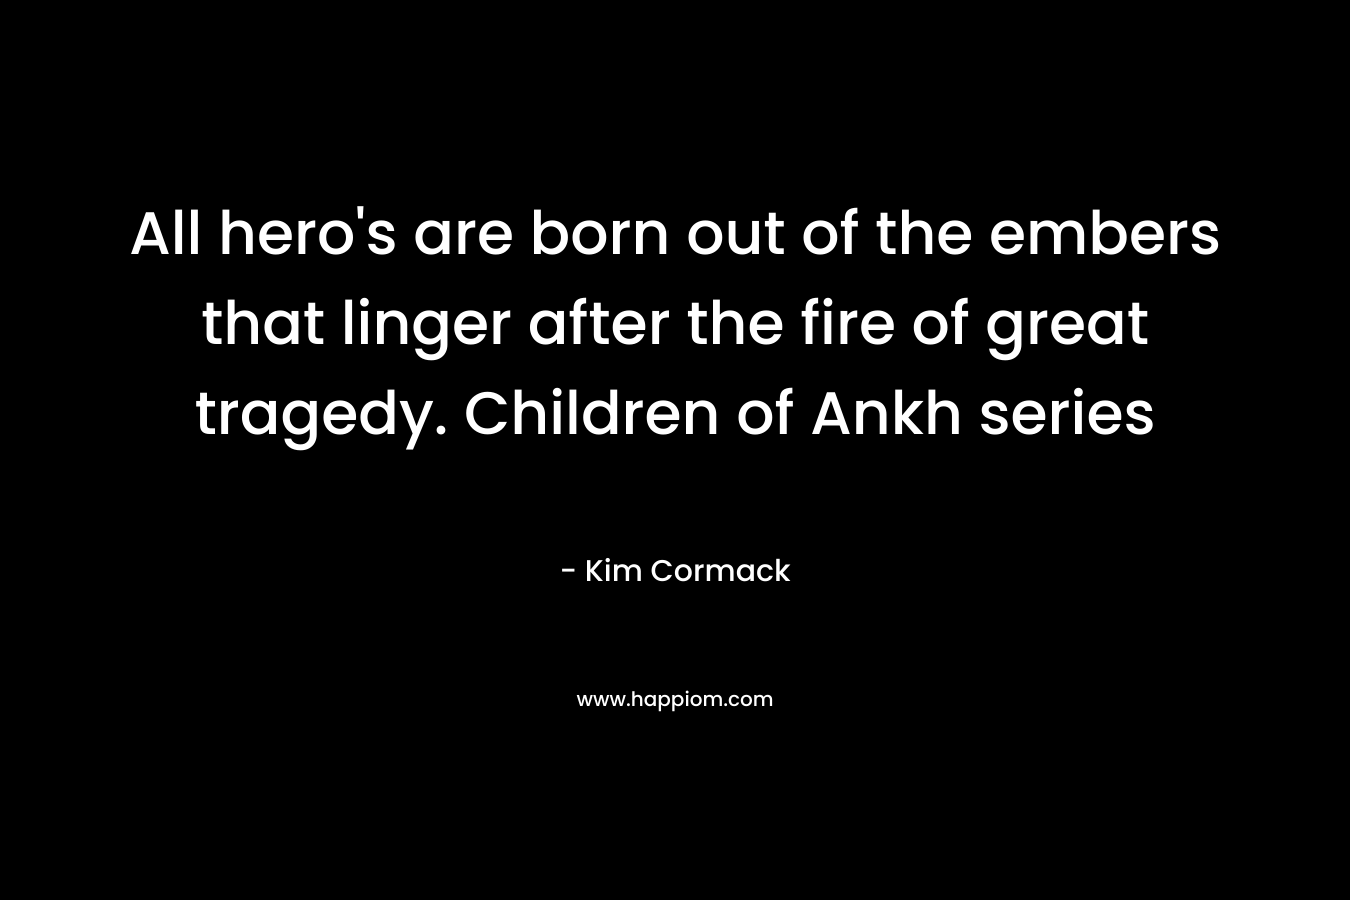 All hero’s are born out of the embers that linger after the fire of great tragedy. Children of Ankh series – Kim Cormack